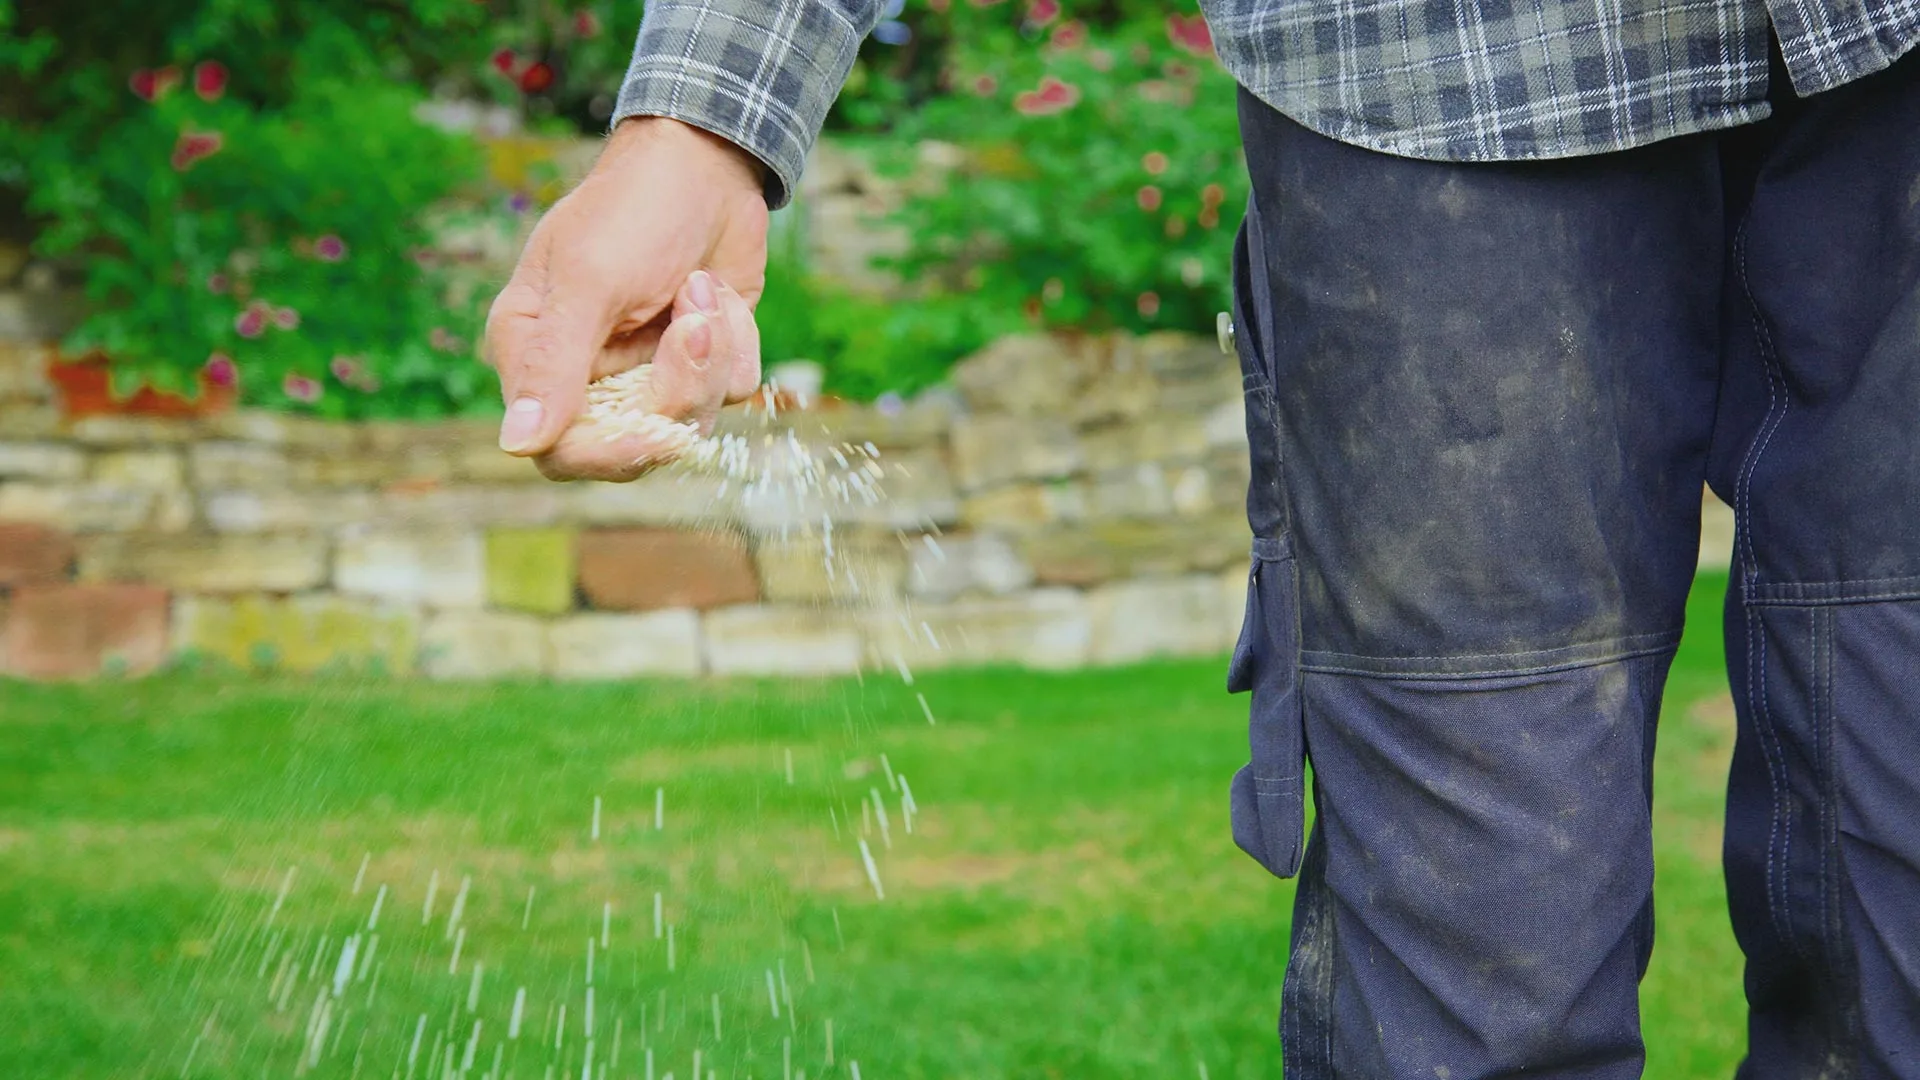 DIY Fertilization Can Be a Waste of Time & Money - Hire Pros Instead!